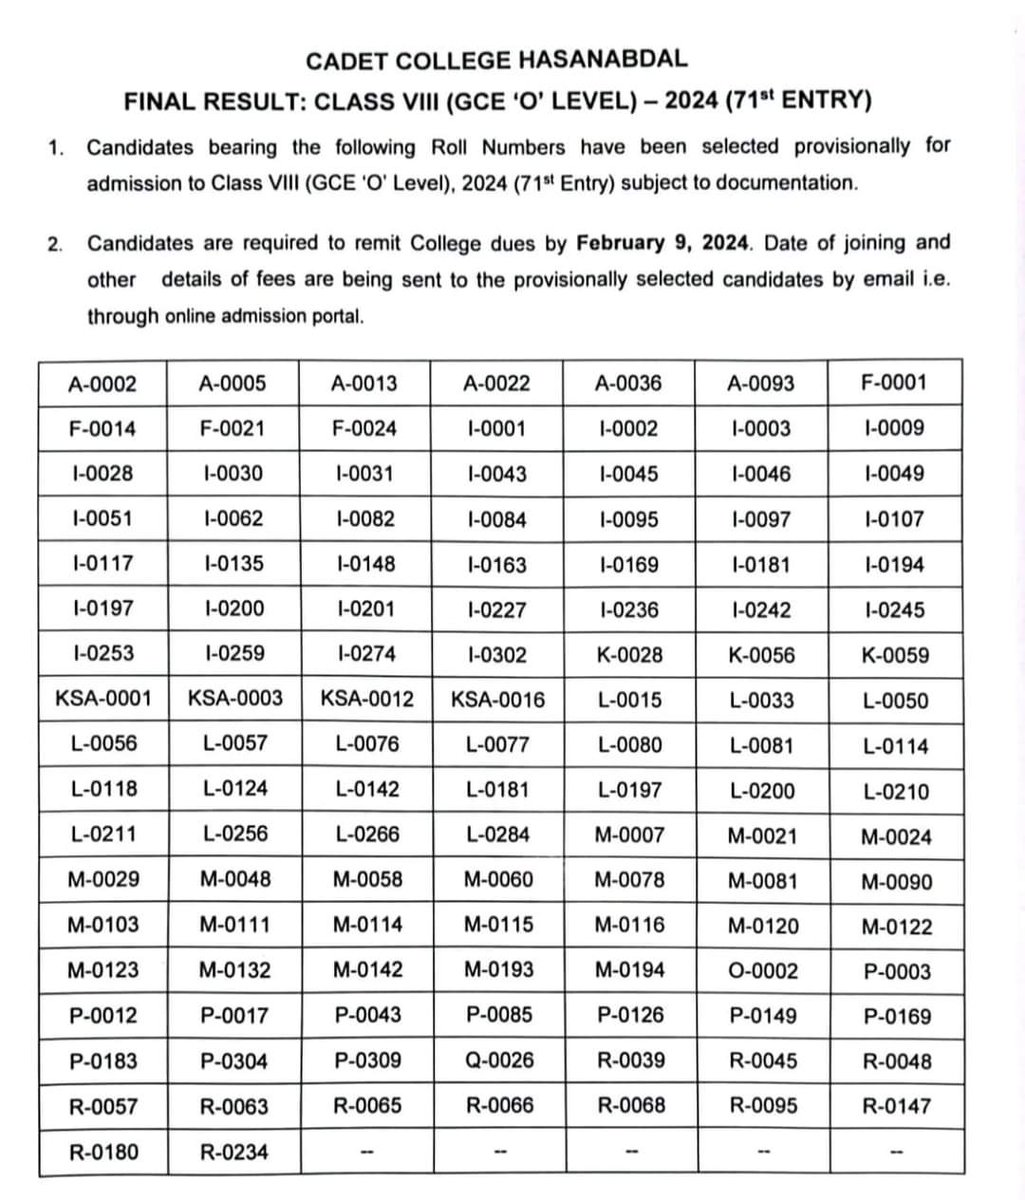 The result of Entrance Test for Class O-Level 2024 (71st Entry) has been announced. The following candidates have been provisionally selected for Class O-Level, 2024 (71st Entry) subject to documentation. Candidates are required to remit College dues by Feb 9, 2024.